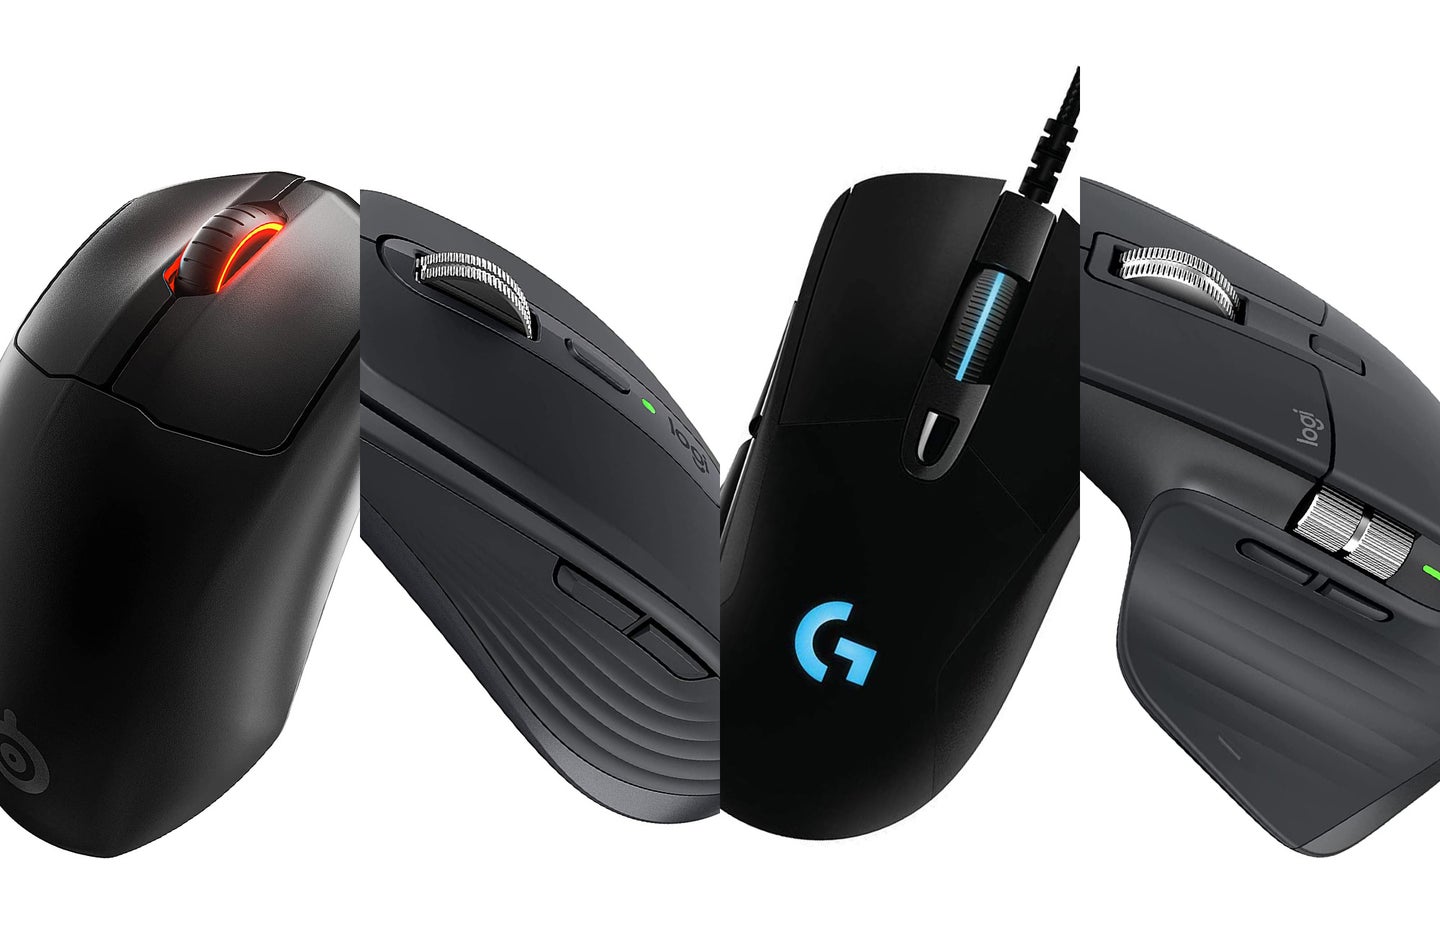 The best mouse for macs composited